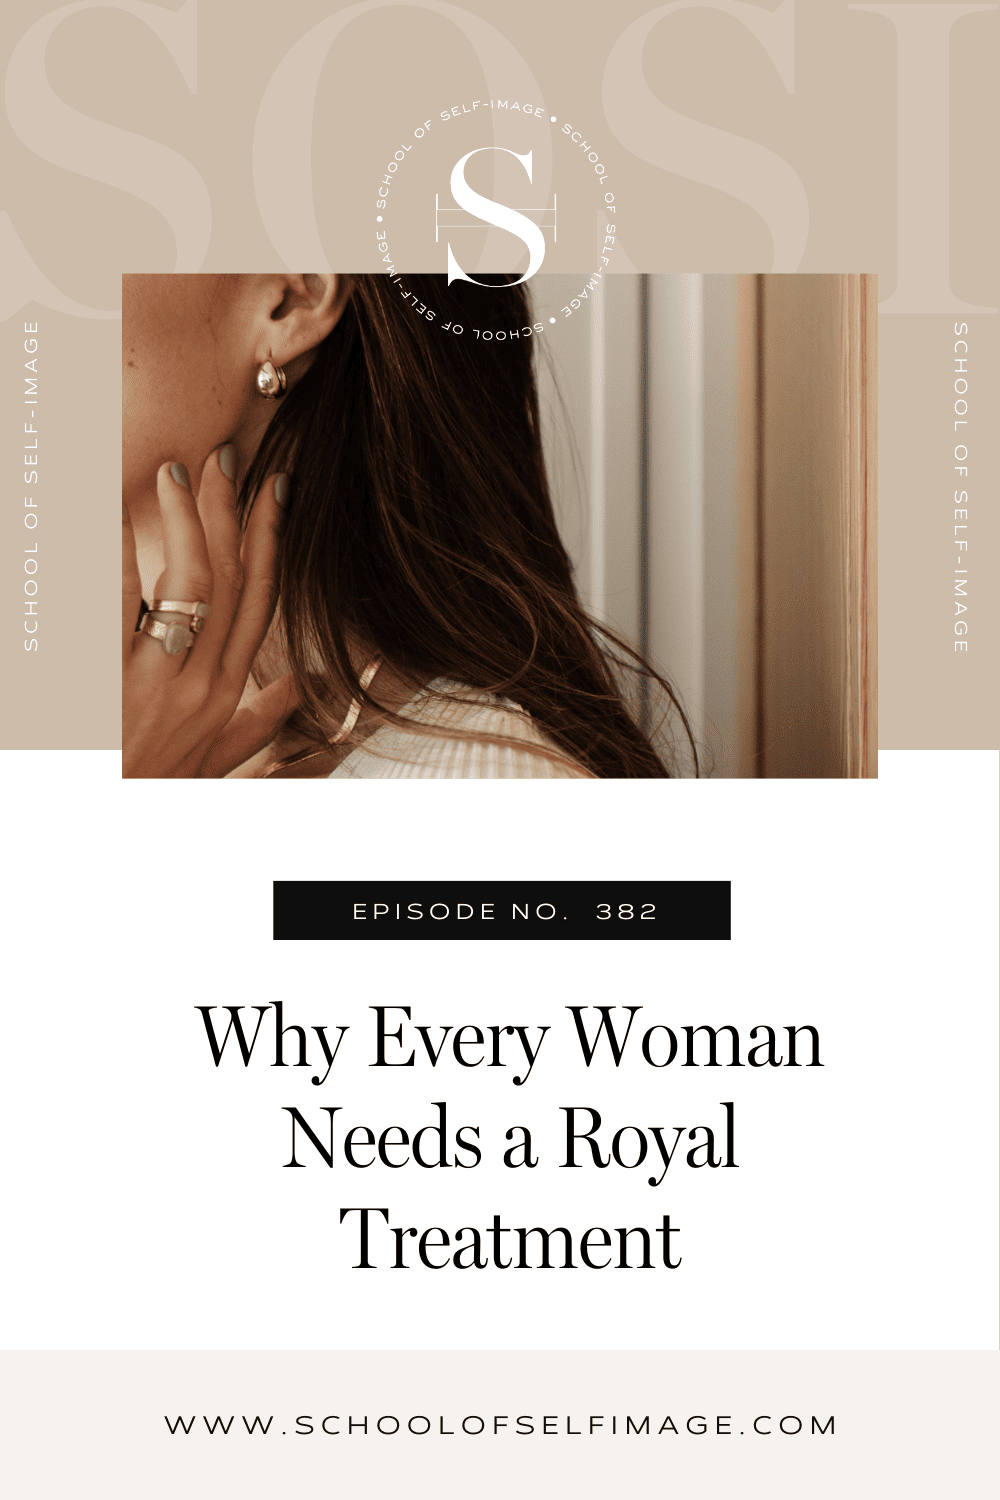 Why Every Woman Needs a Royal Treatment